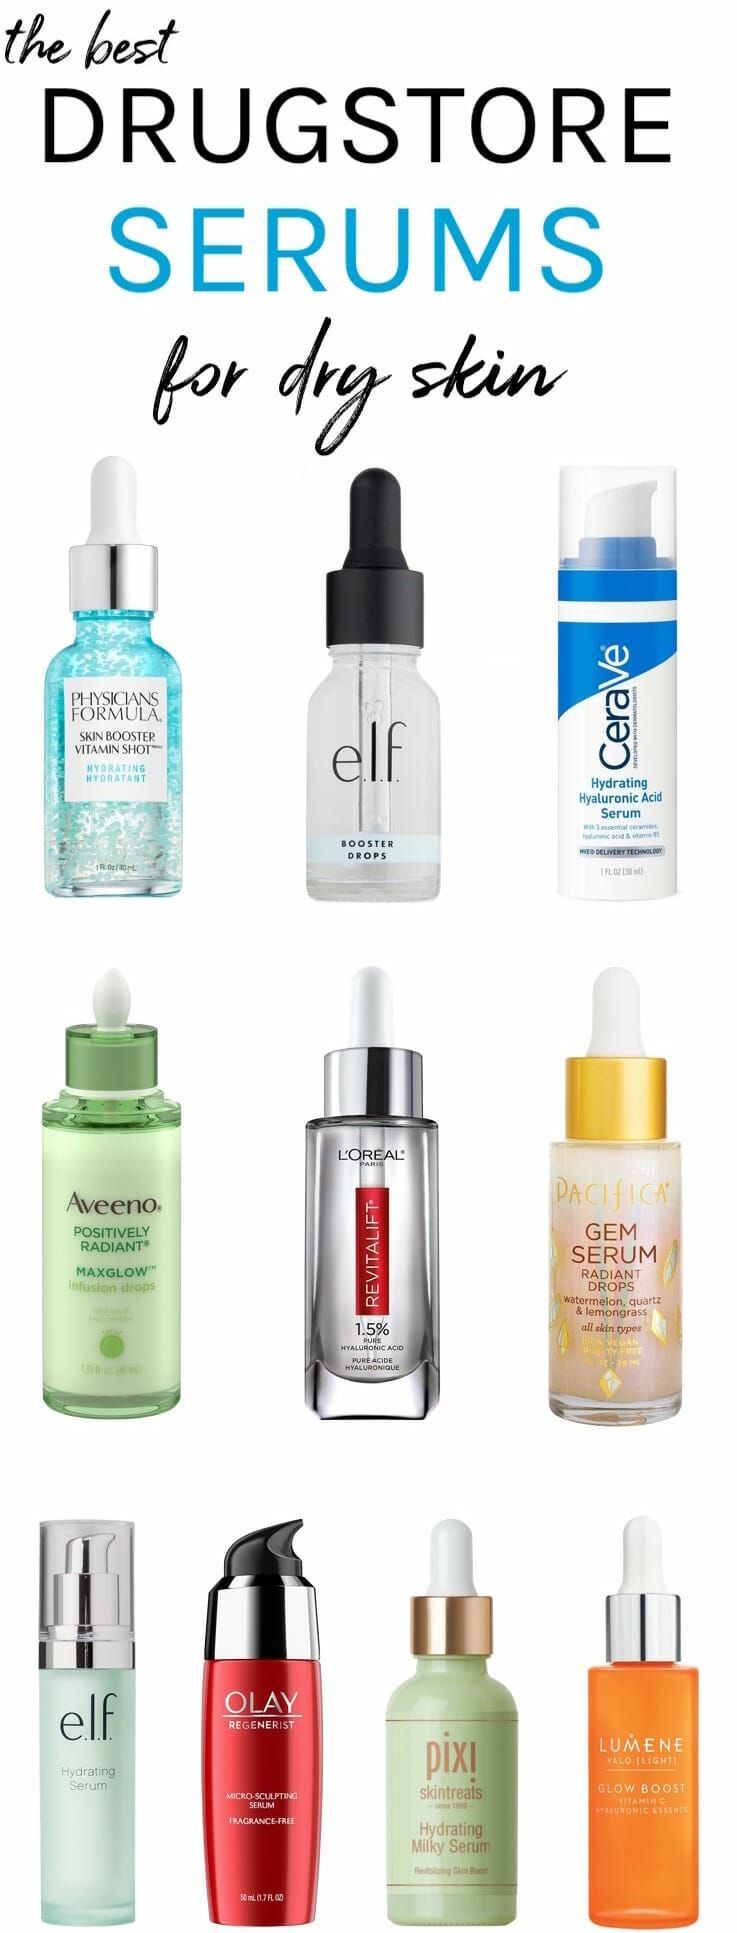 Winter Woes Begone! The Best Drugstore Serums For Dry Skin -   13 skin care Dry facials ideas